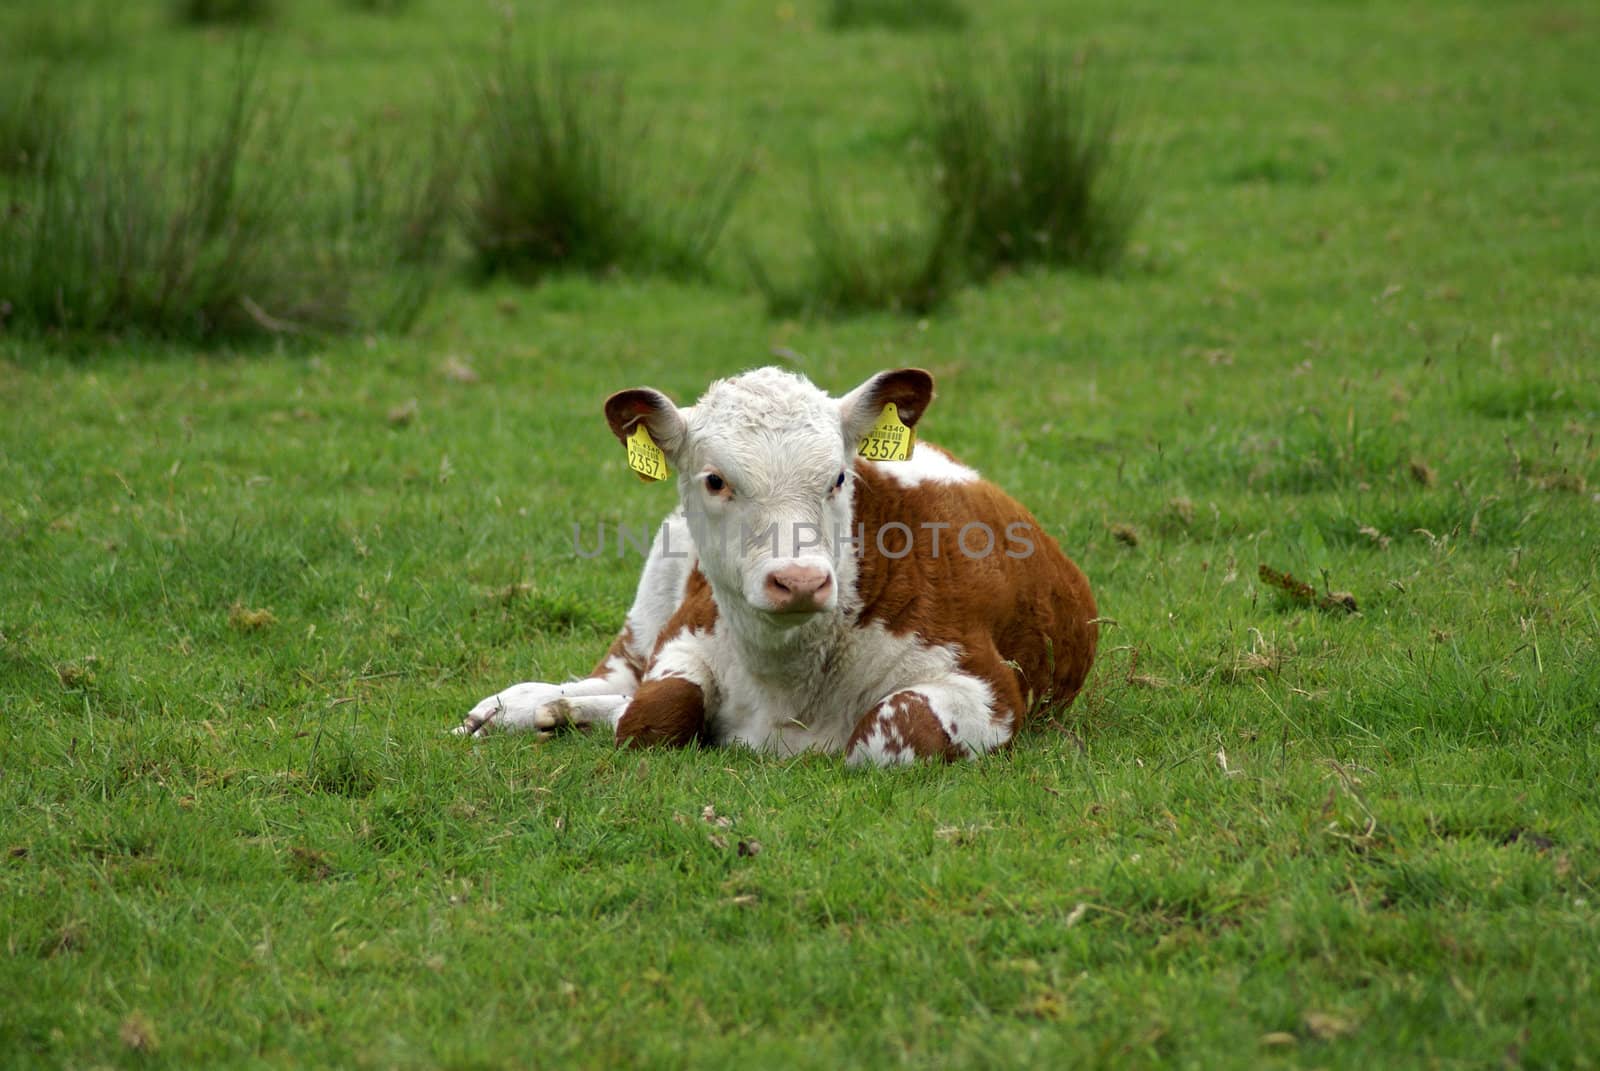 A calf resting in meadow.